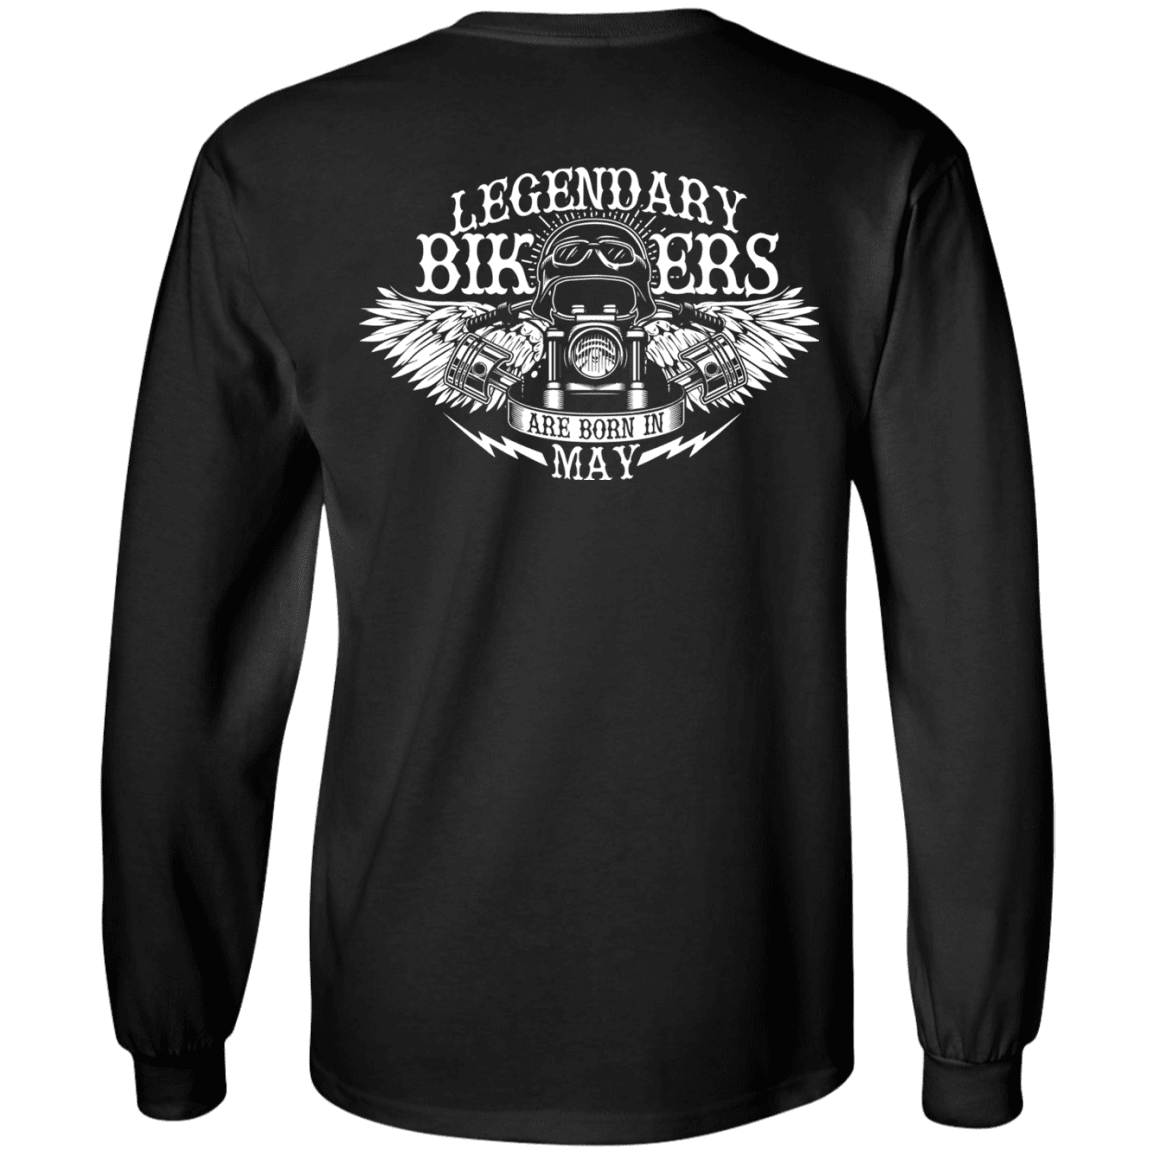 Bikers Born in May T-Shirt - American Legend Rider